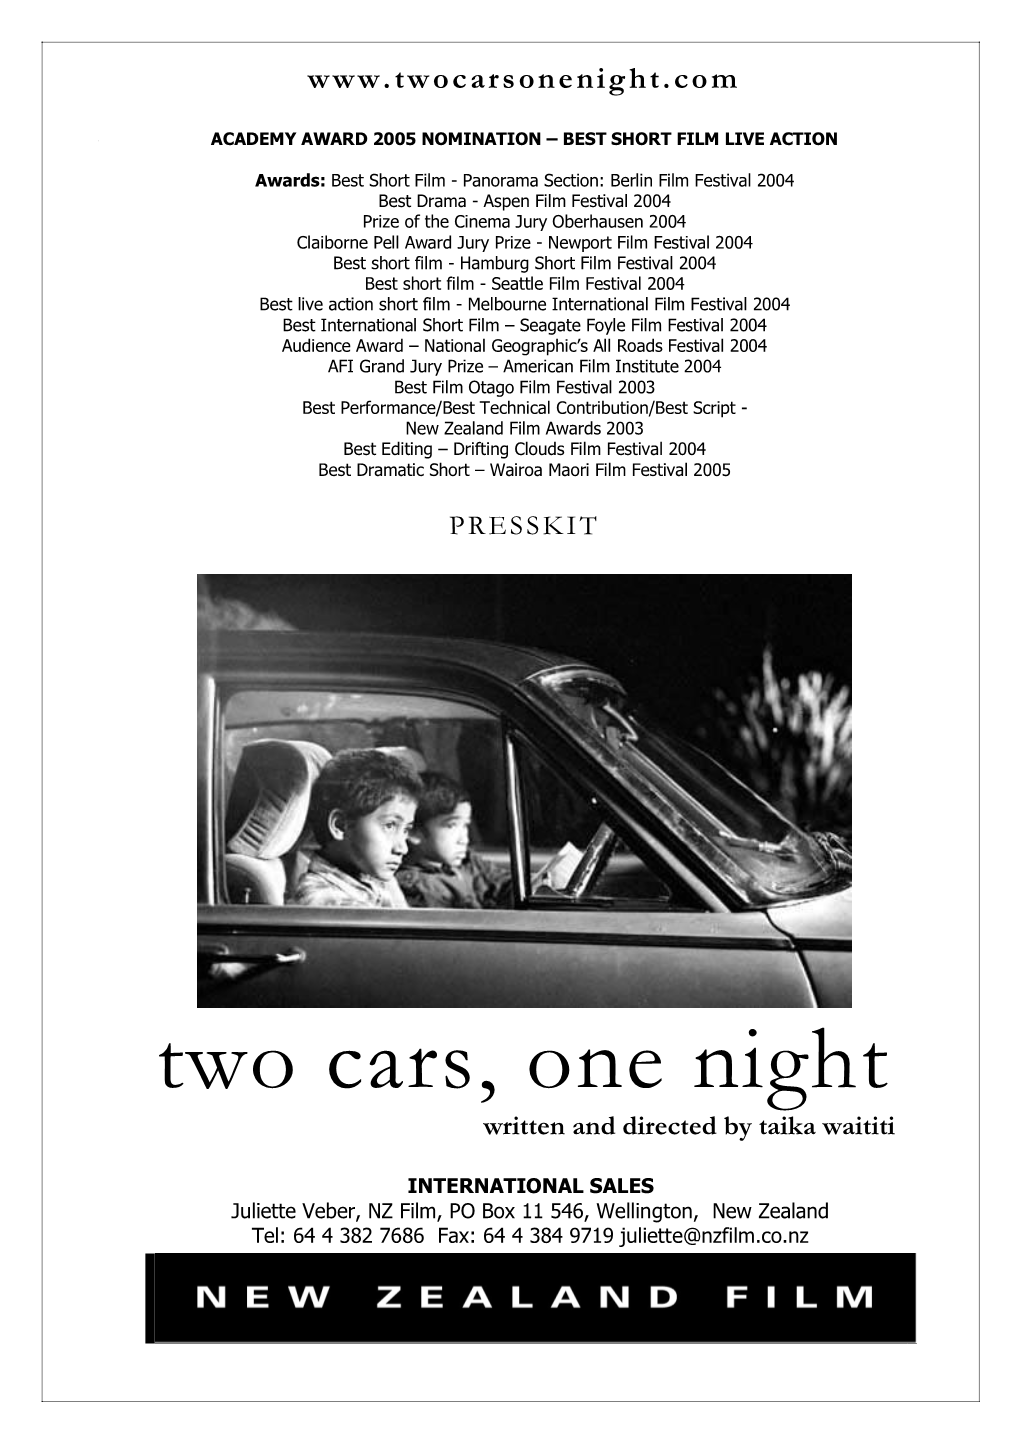 Two Cars, One Night Written and Directed by Taika Waititi